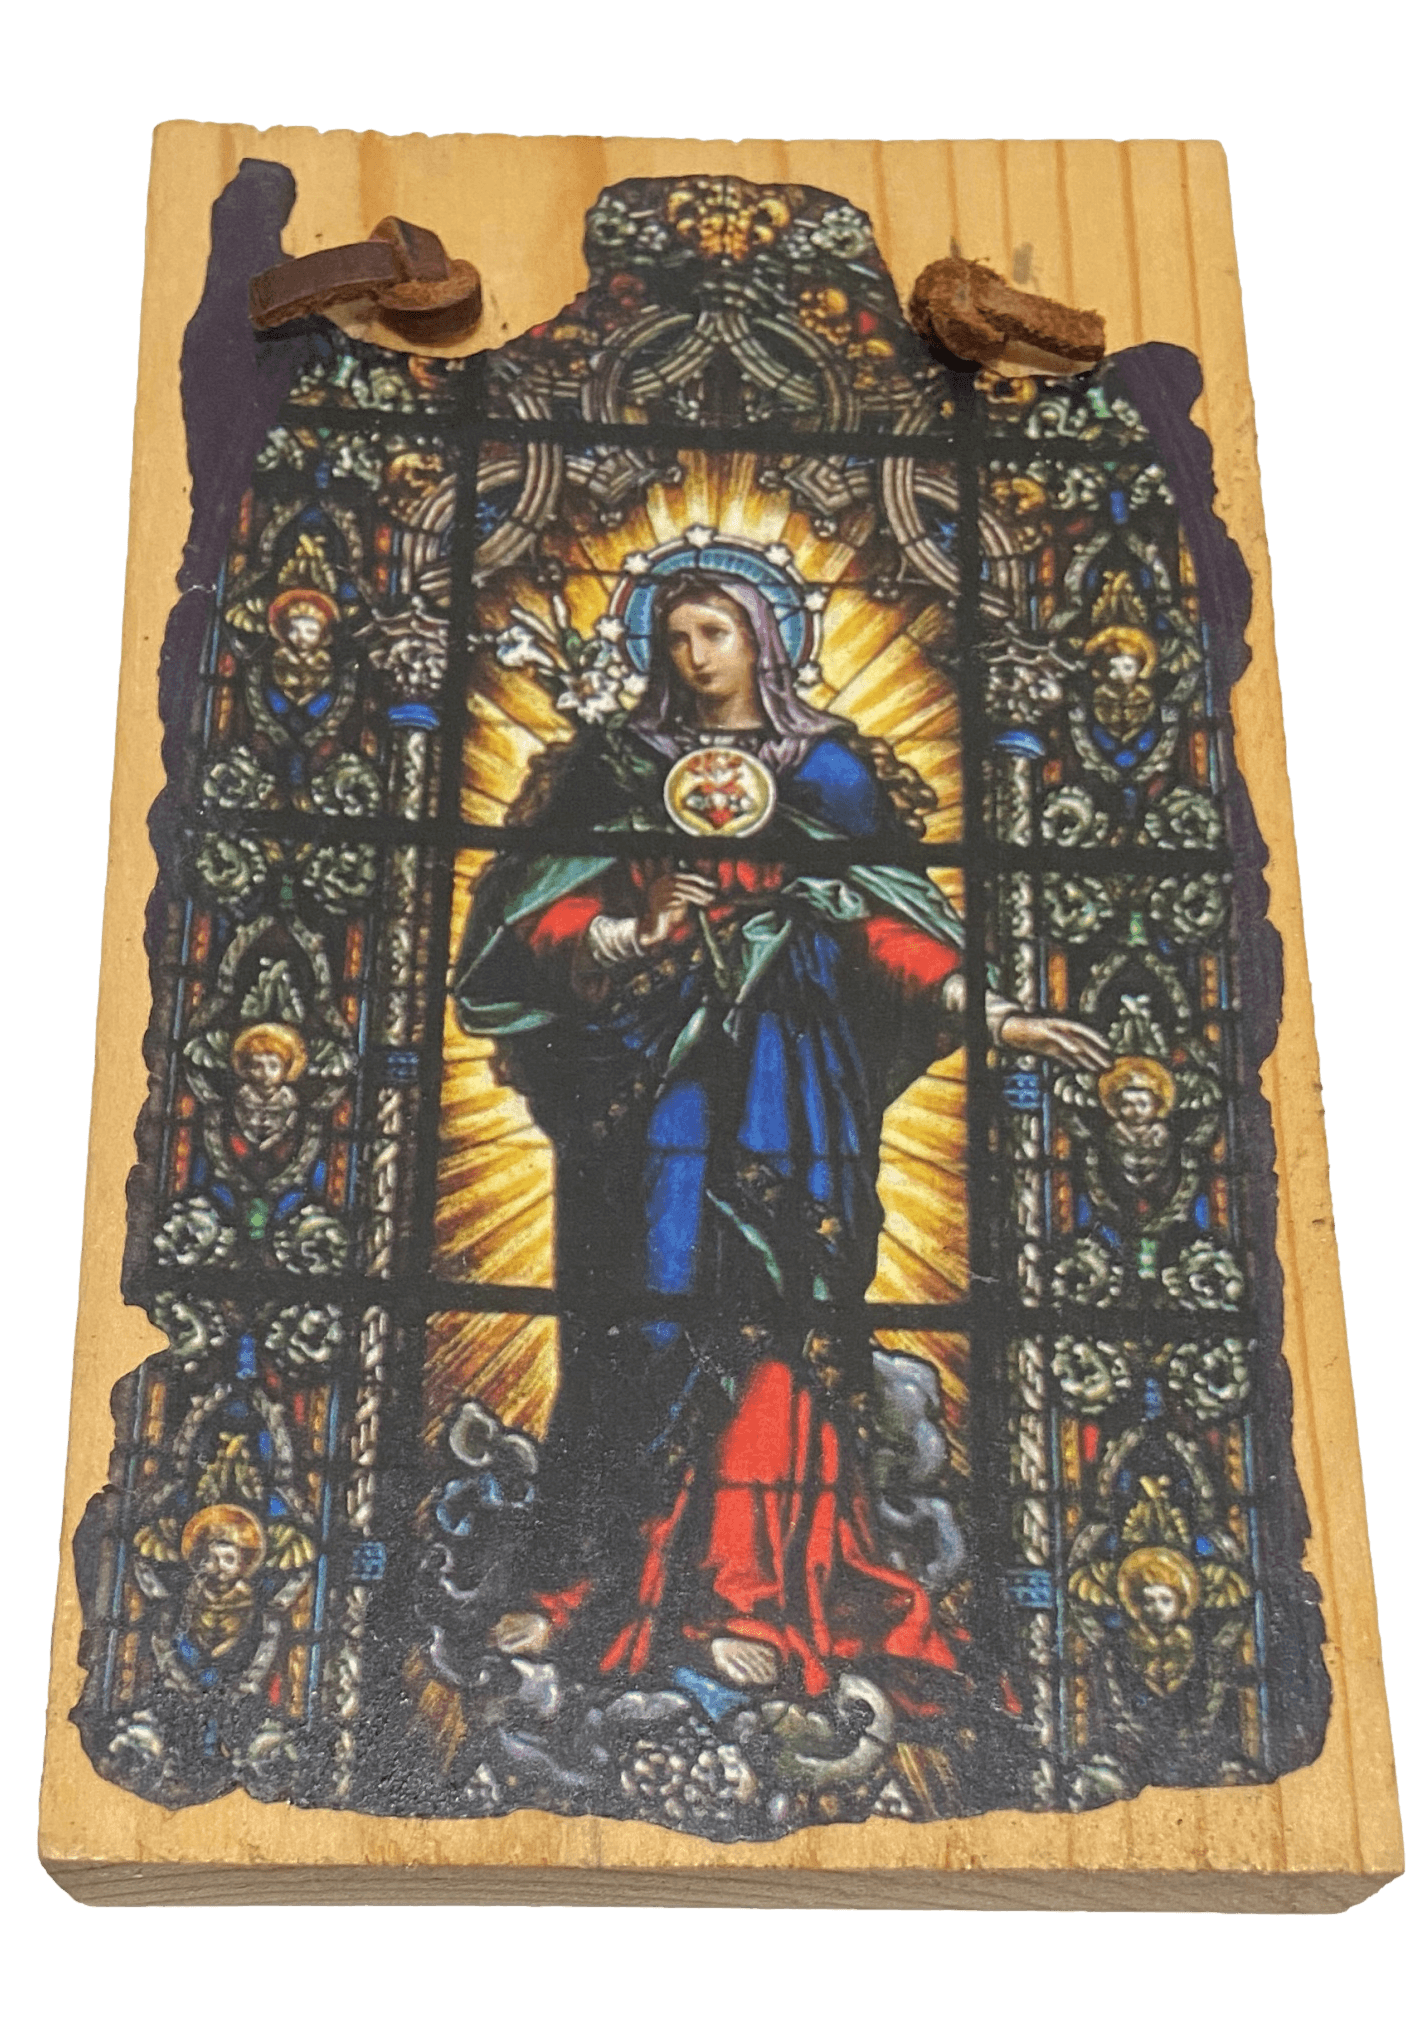 Retablo Wood Saint Monica From Morada In Northern Taos County New Mexico By Artist D. Kelsey 1910 6.5"L x 4" W - Ysleta Mission Gift Shop- VOTED El Paso's Best Gift Shop